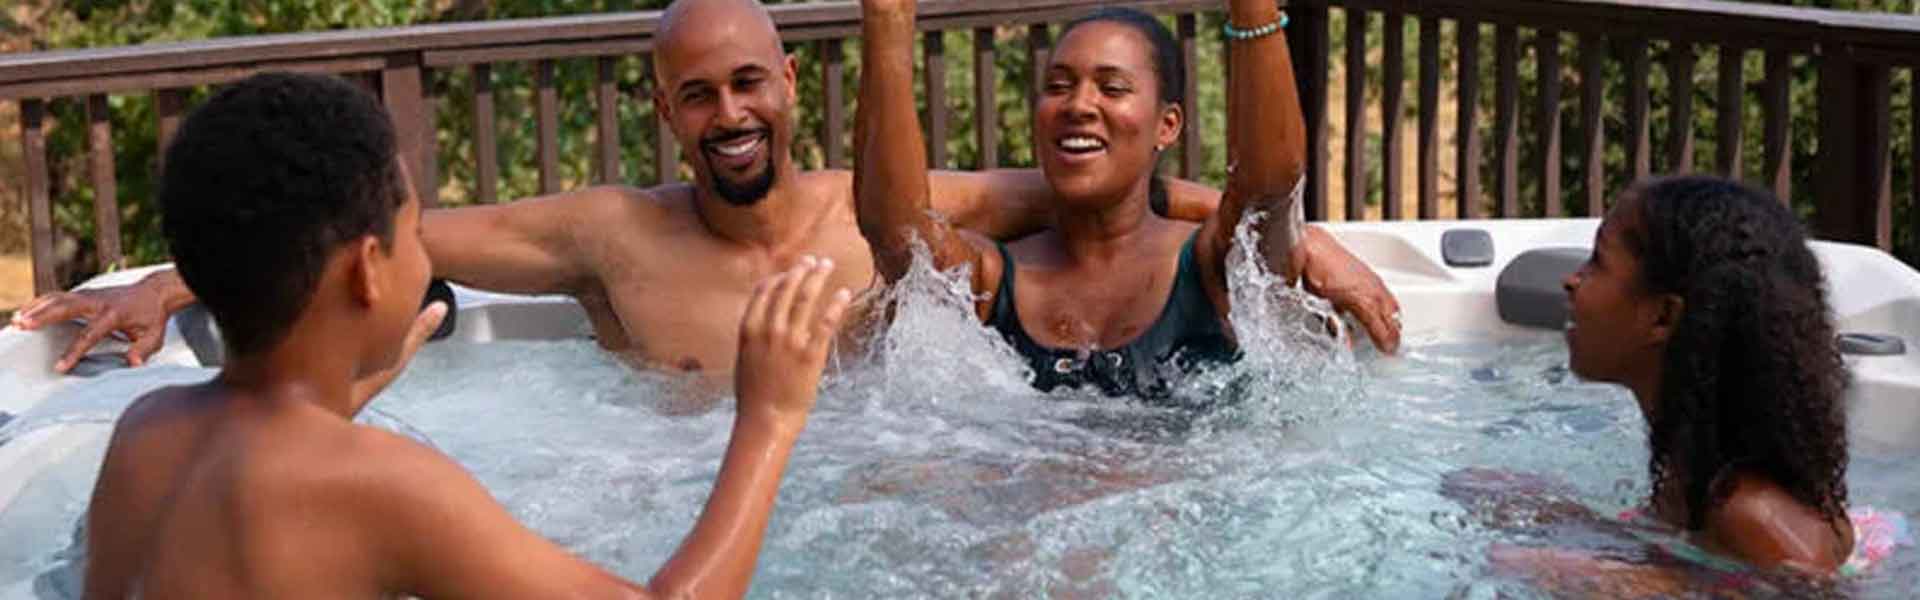 Creating Quality Time: The Benefits of Spending Time with Family in a Hot Tub